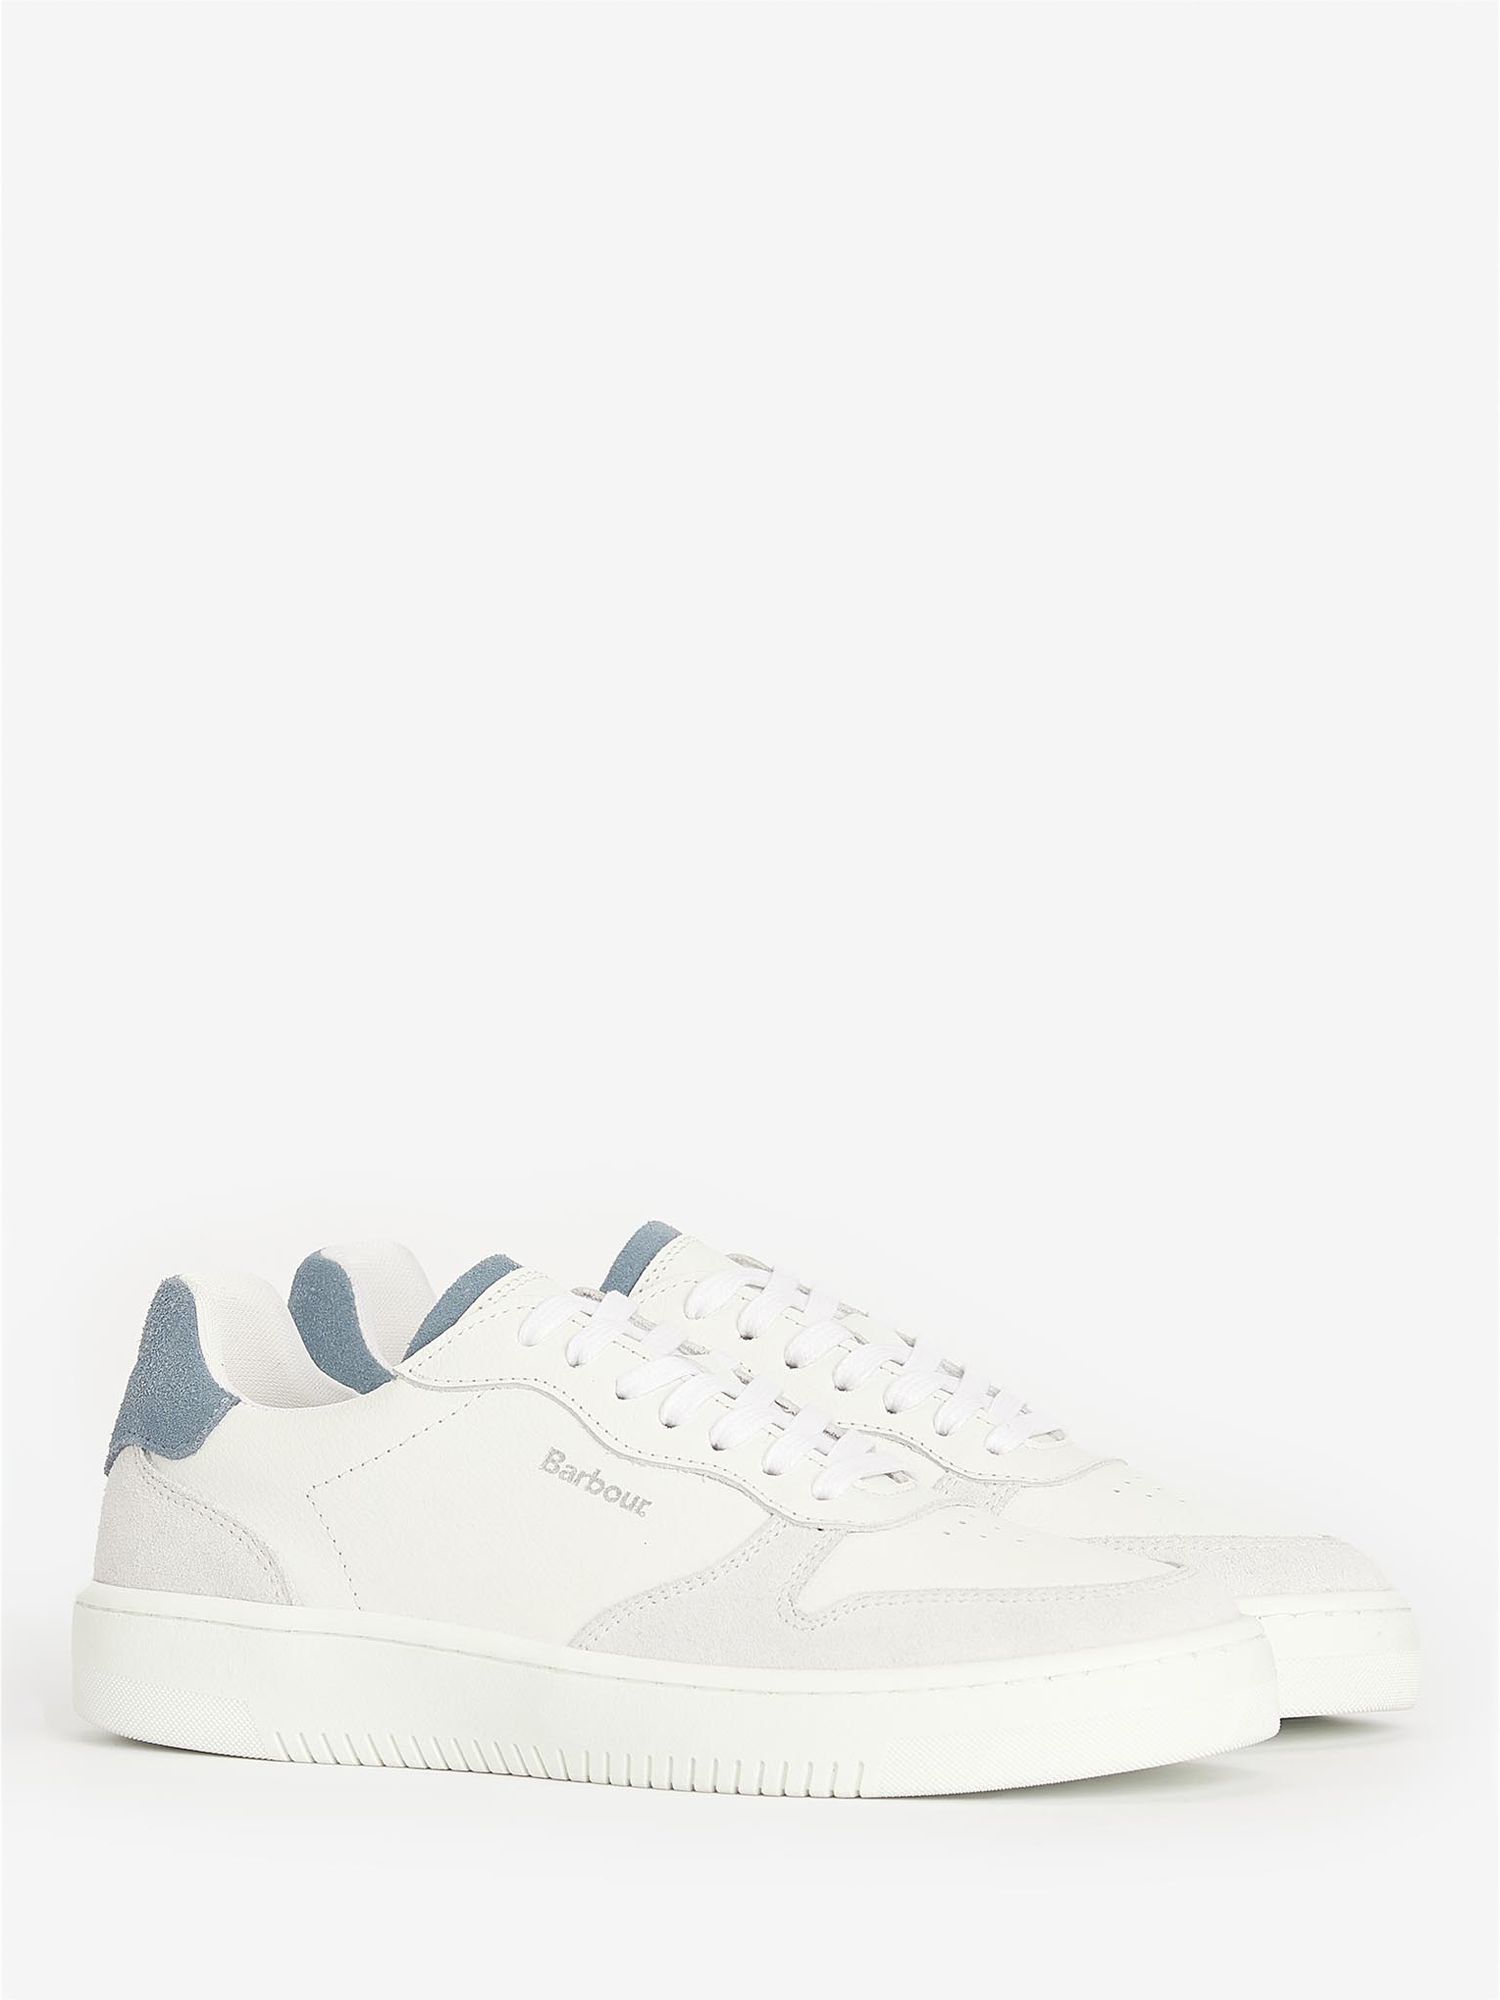 Buy Barbour Celeste Leather and Suede Trainers Online at johnlewis.com